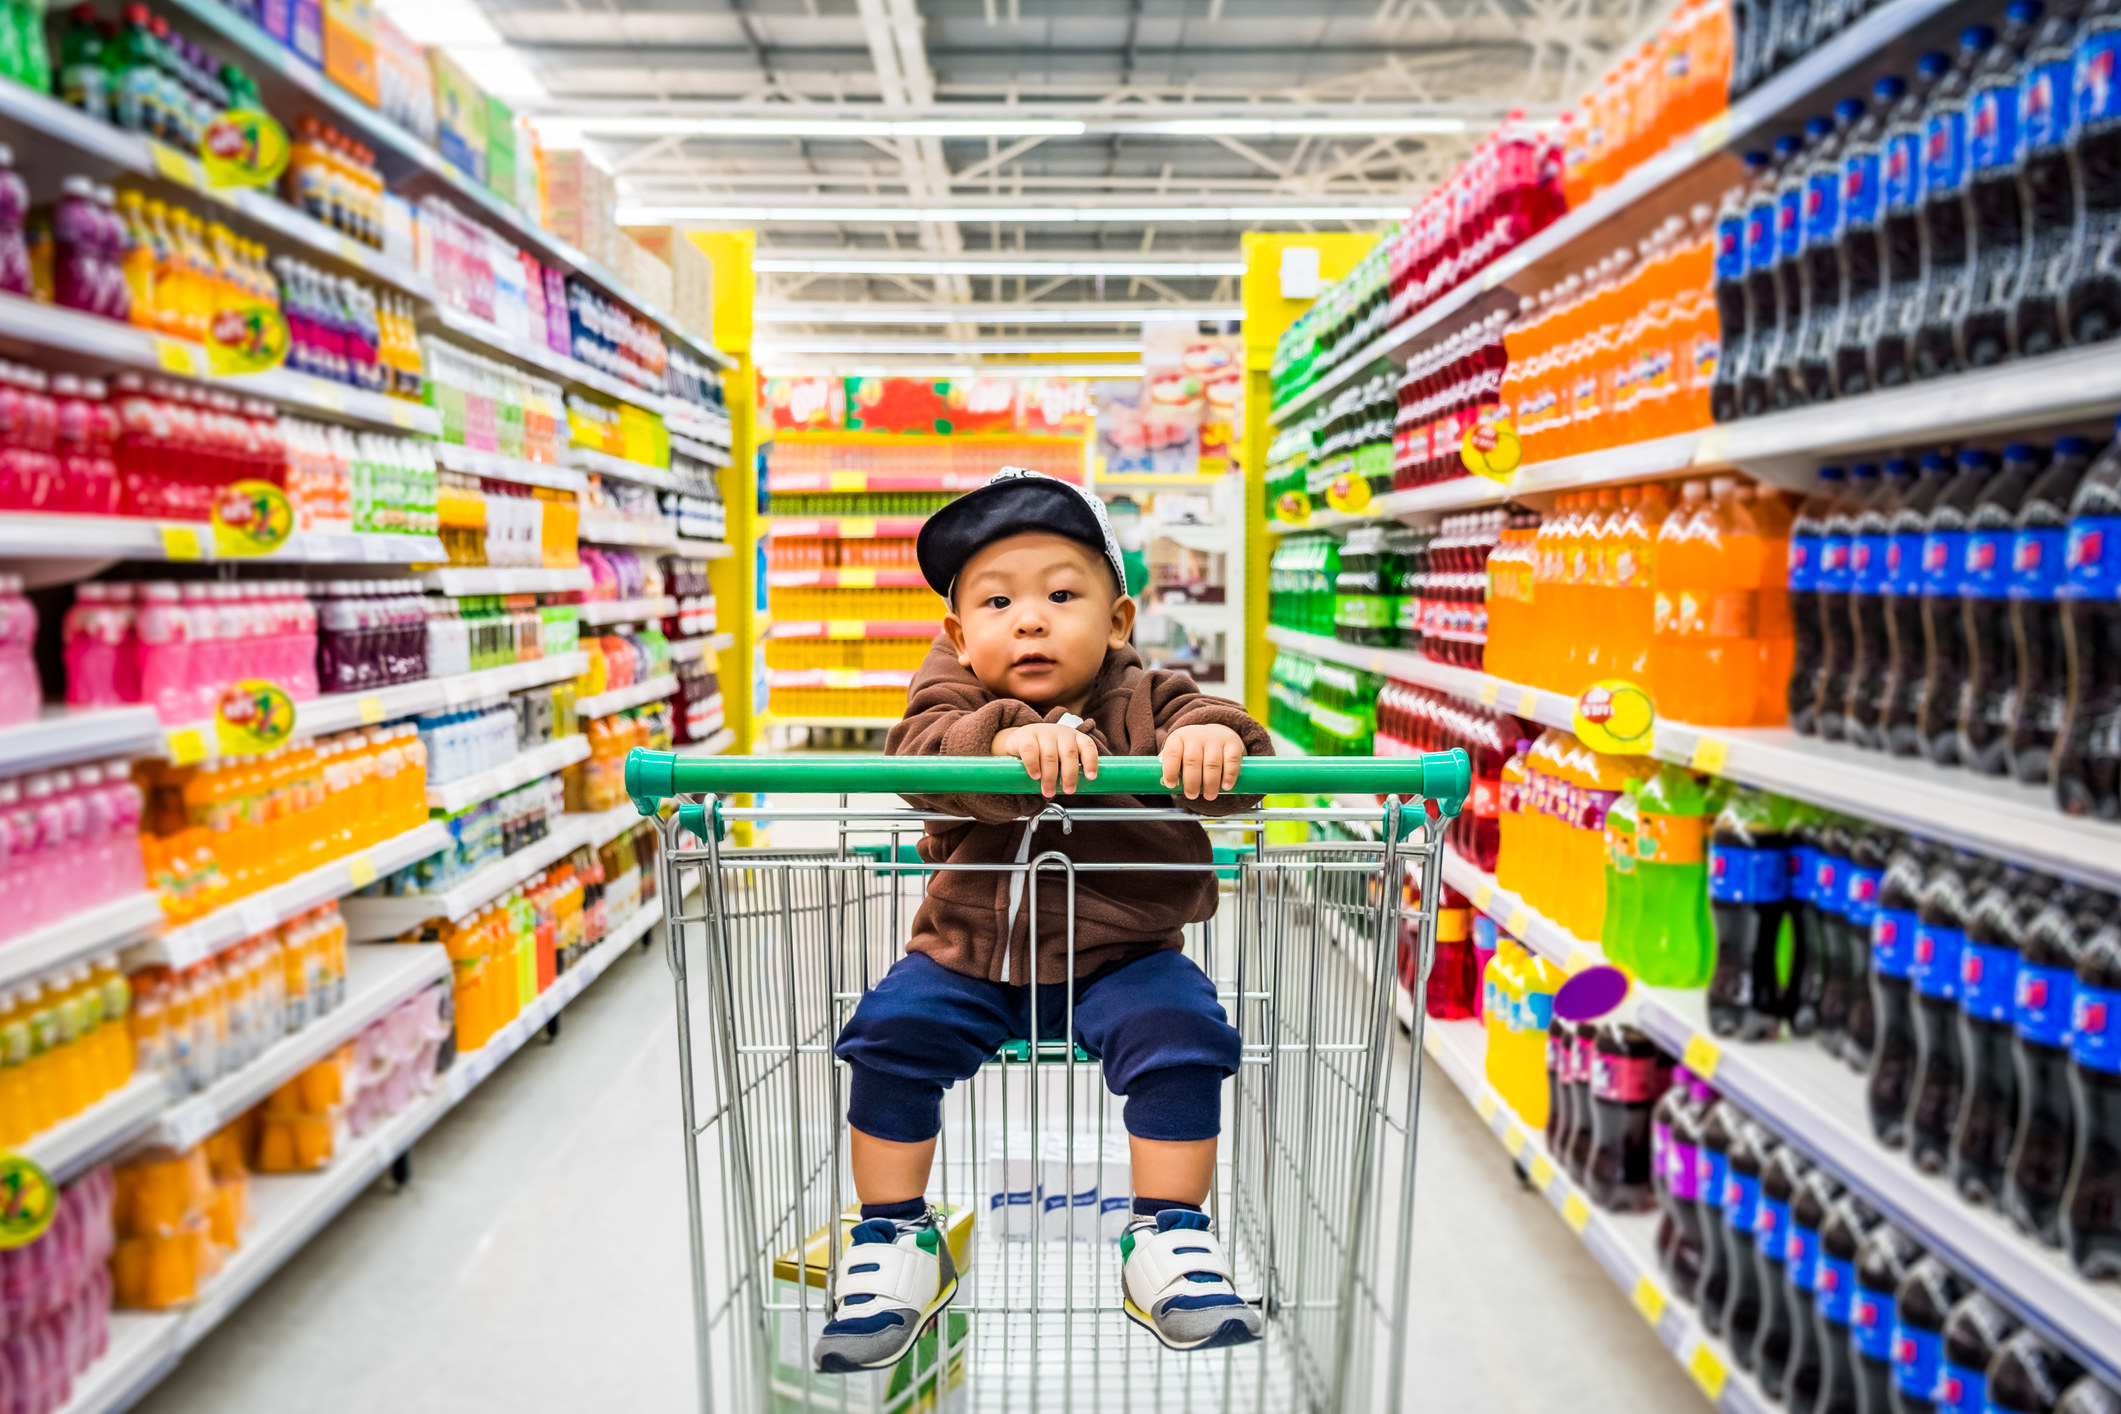 A toddler in a grocery cart at the supermarket